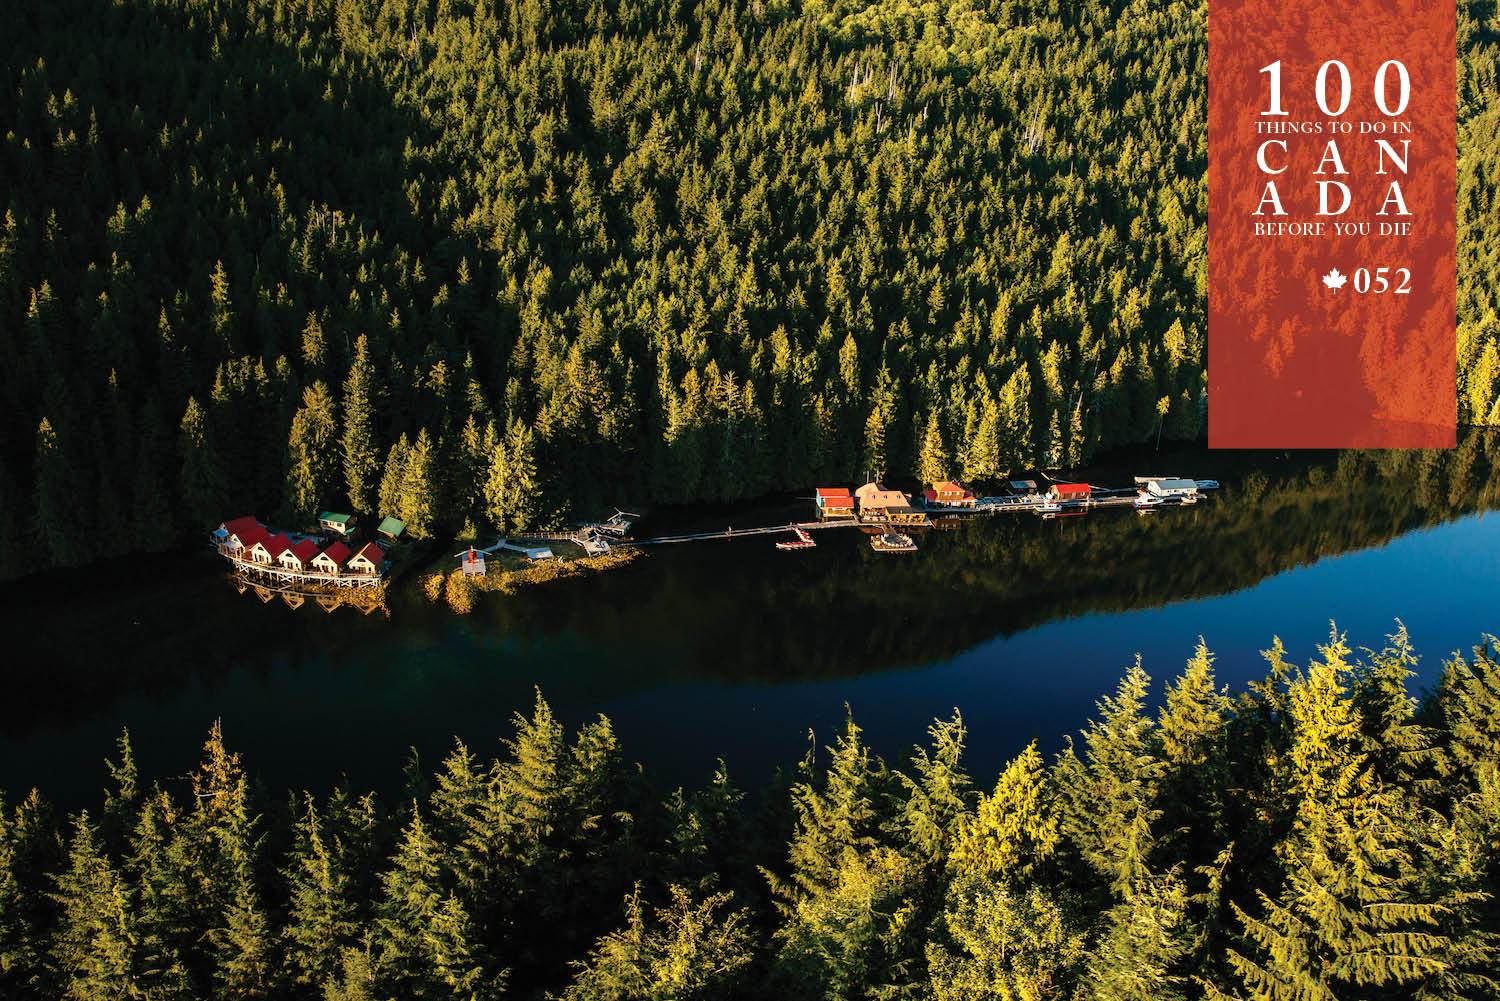 Lodge in style at the Great Bear Rainforest's Nimmo Bay Resort